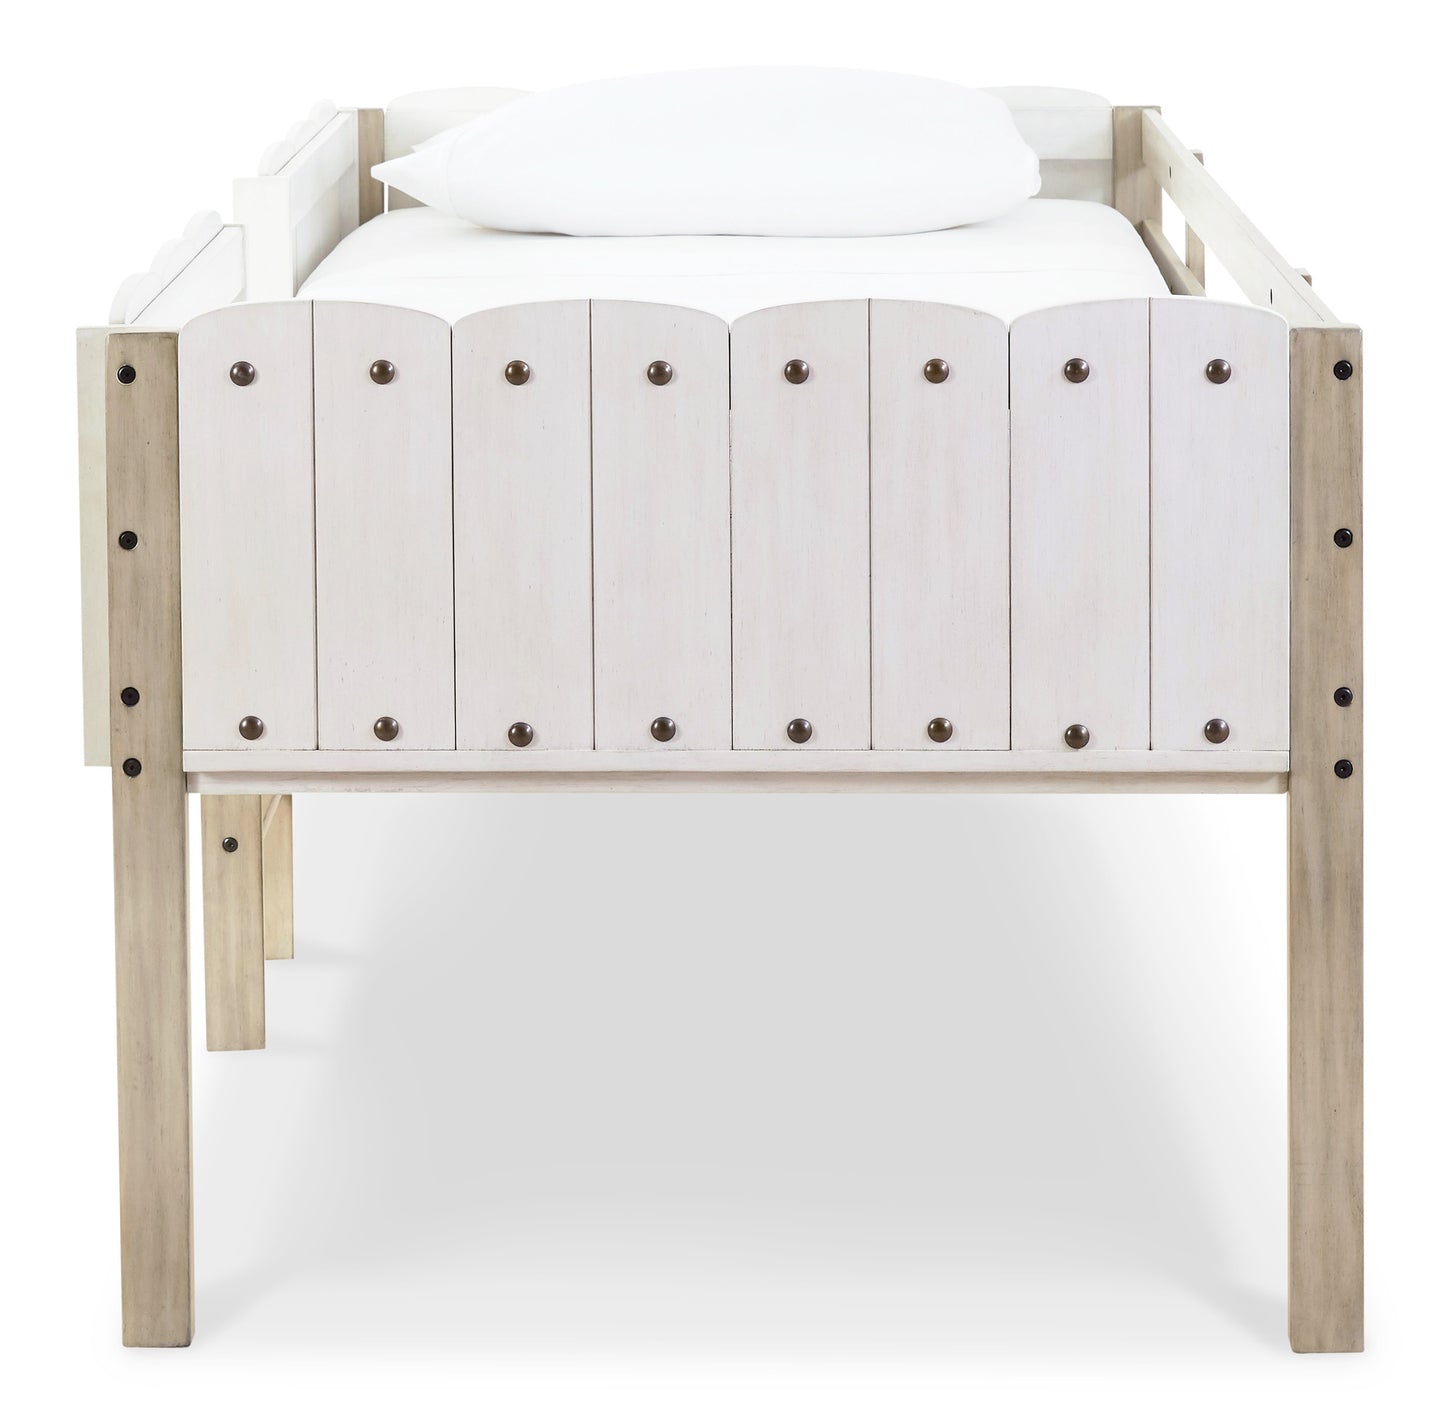 Ashley Wrenalyn Brown+White Contemporary Twin Loft Bed Frame B081-162